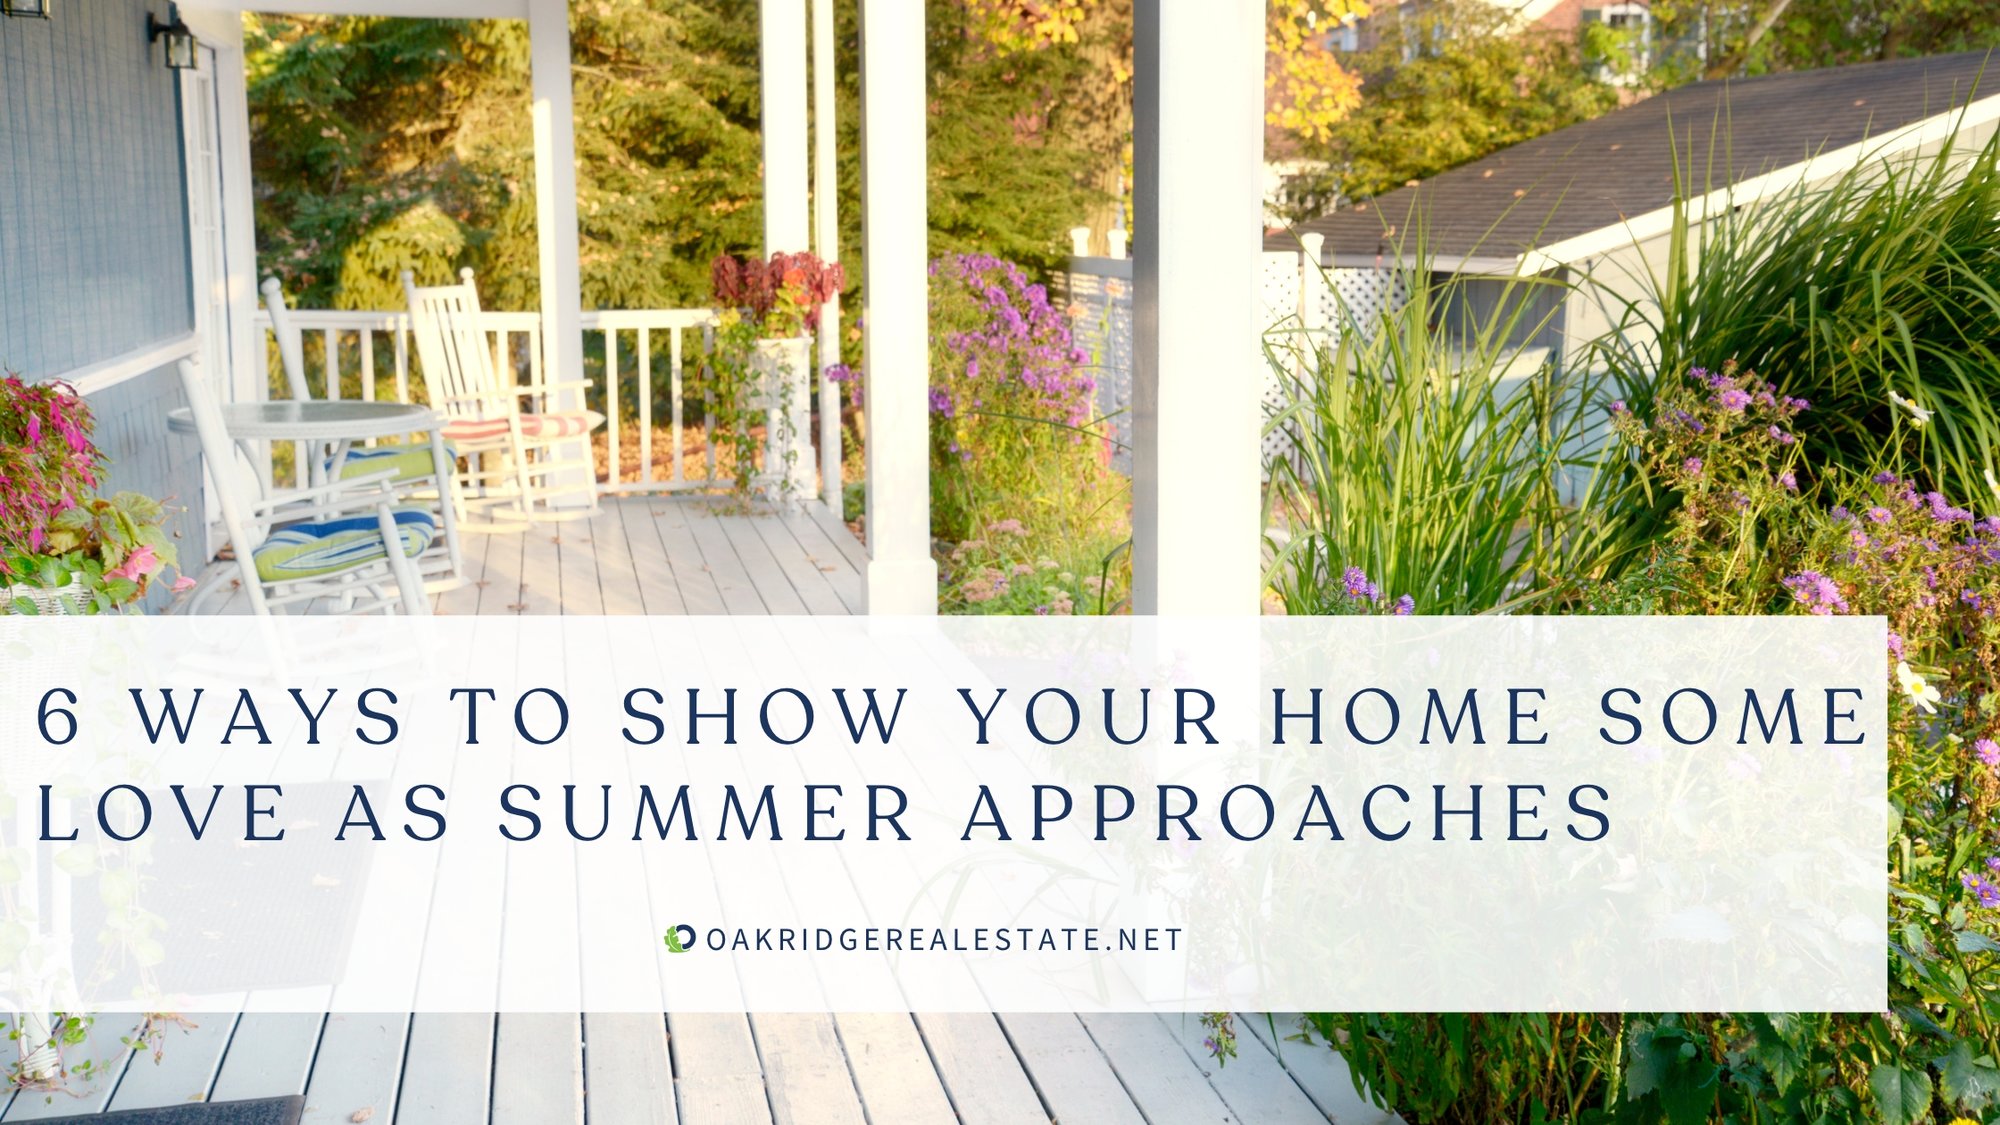 6 Ways to Show your home some love as summer approaches